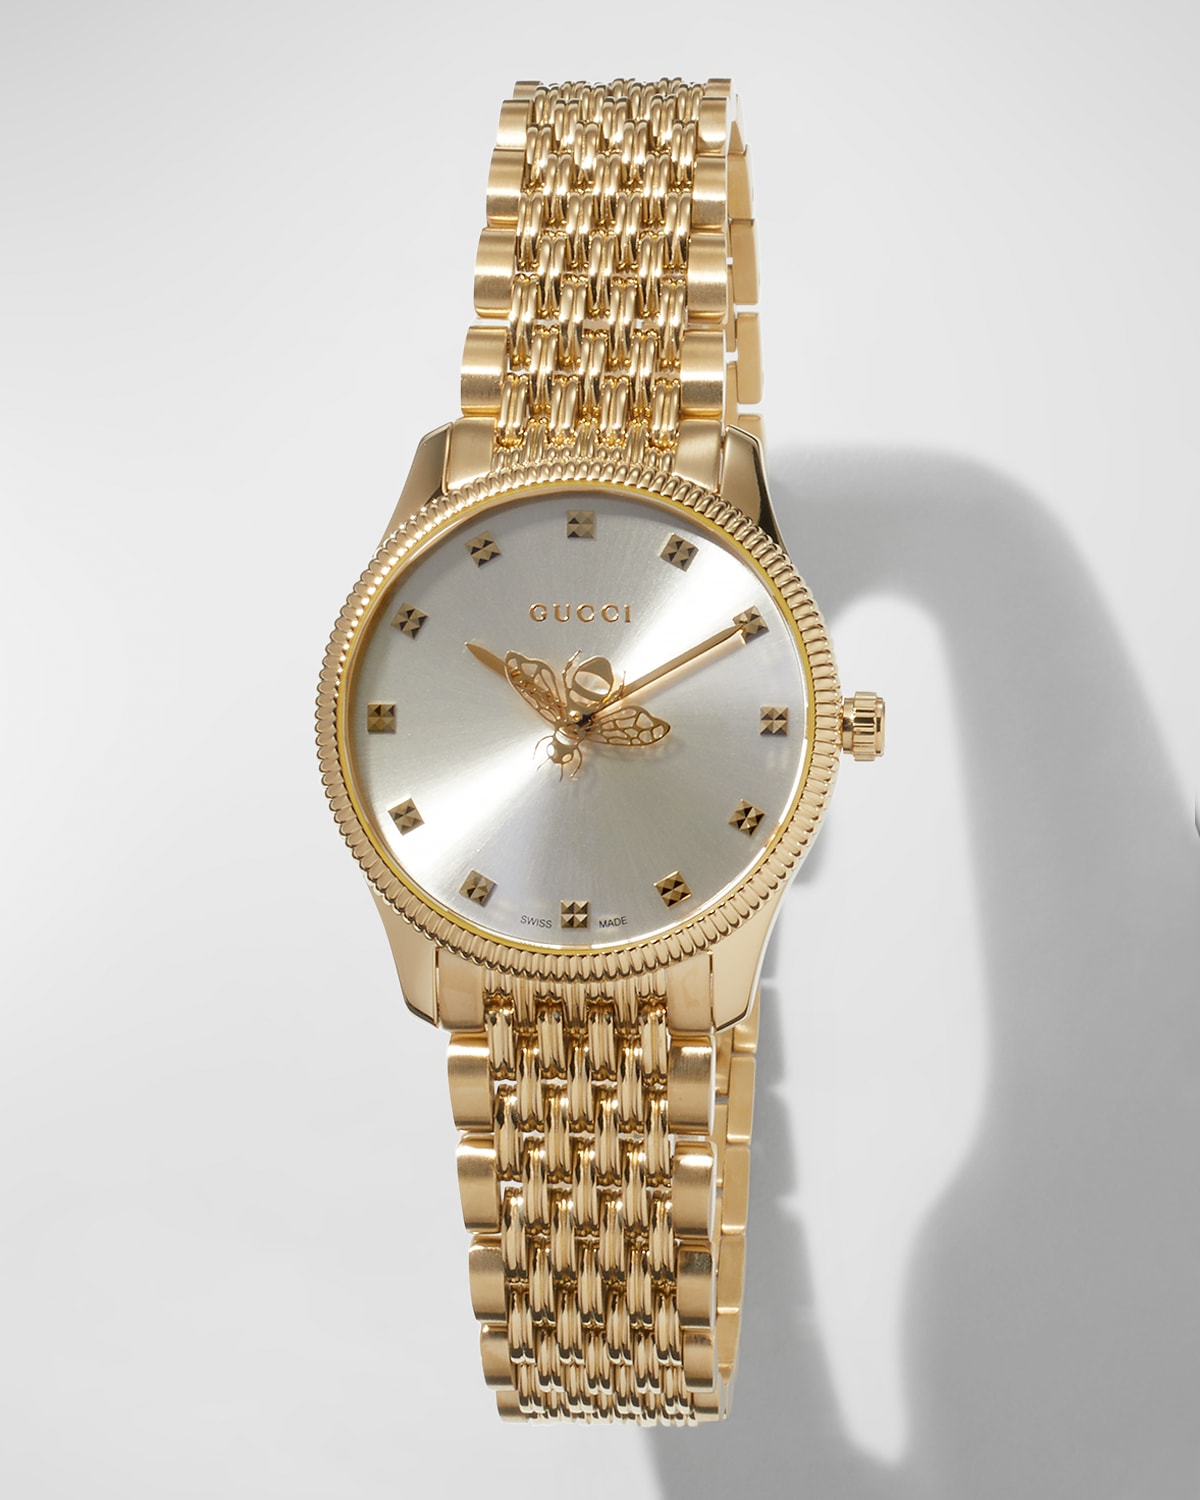 29mm G-Timeless Bee Watch with Bracelet Strap, Gold | Neiman Marcus